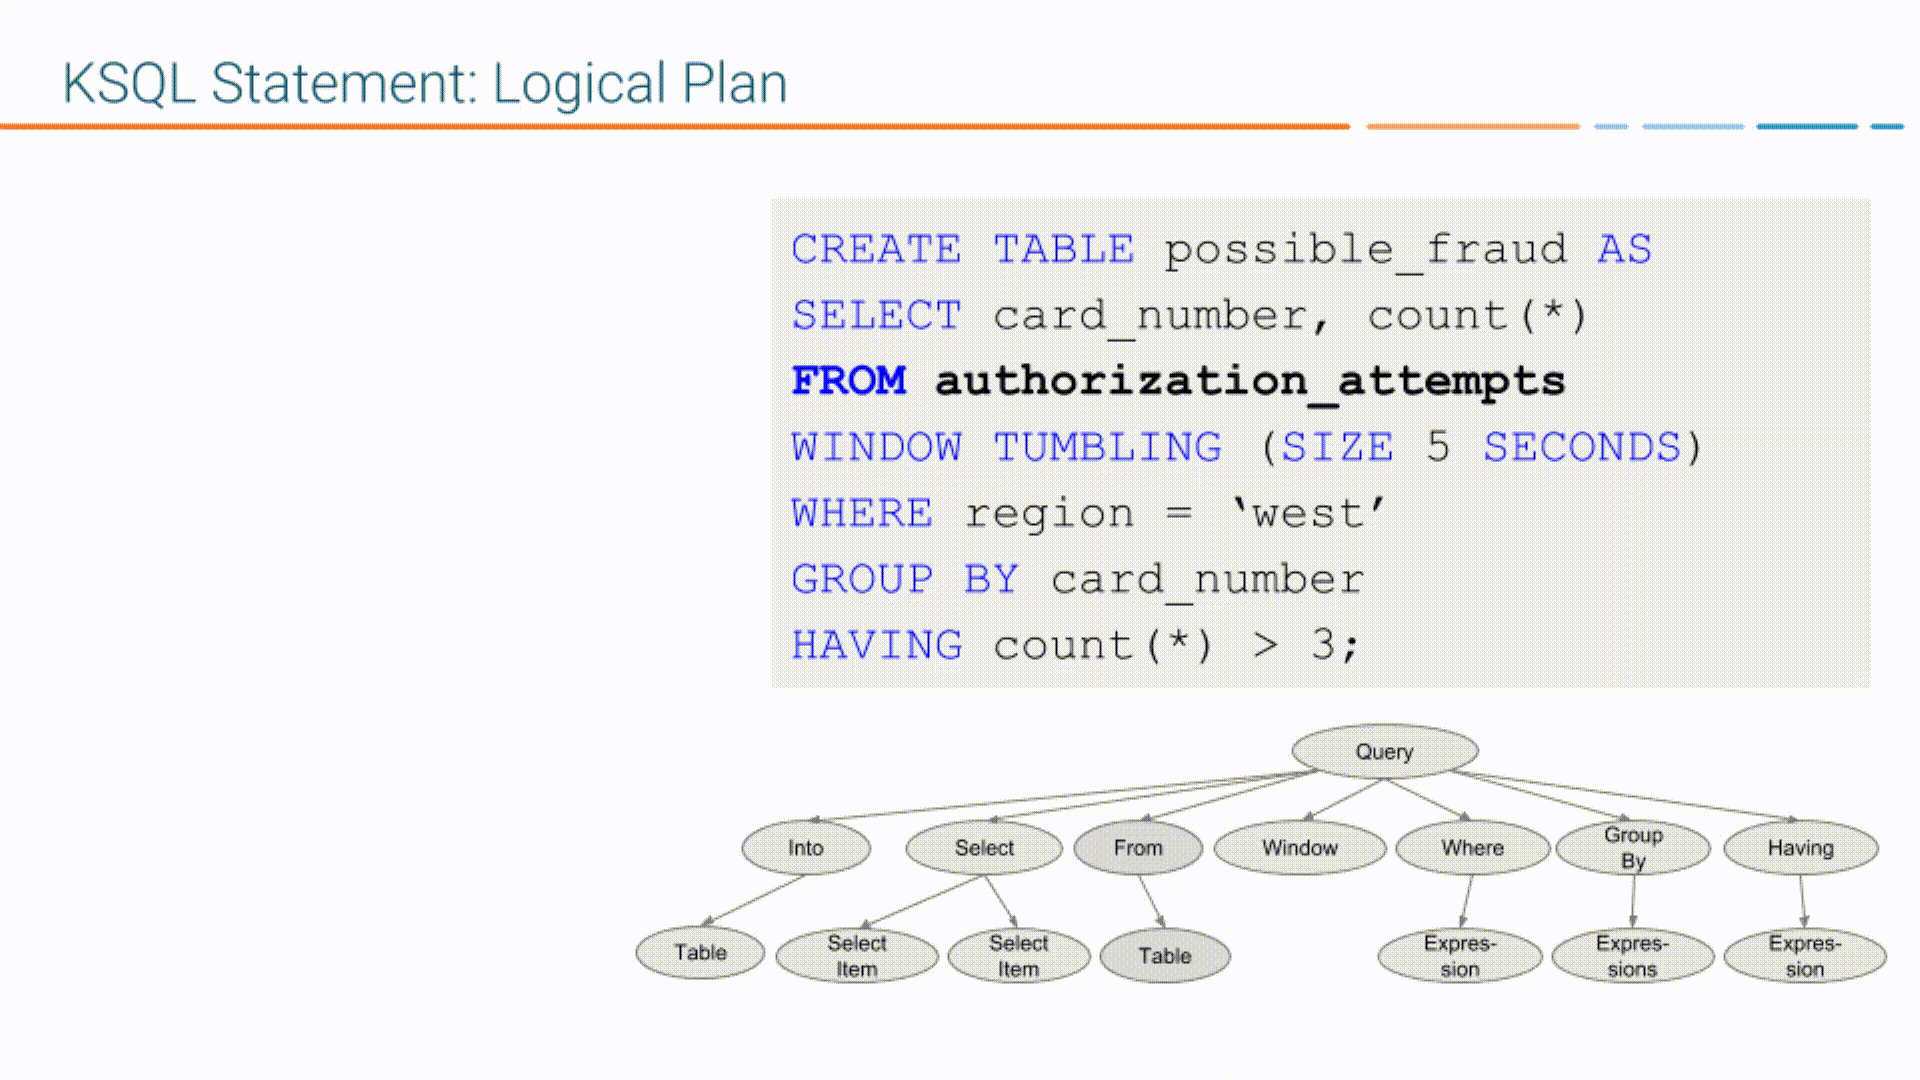 Diagram showing how the ksqlDB engine creates a logical plan for a SQL statement